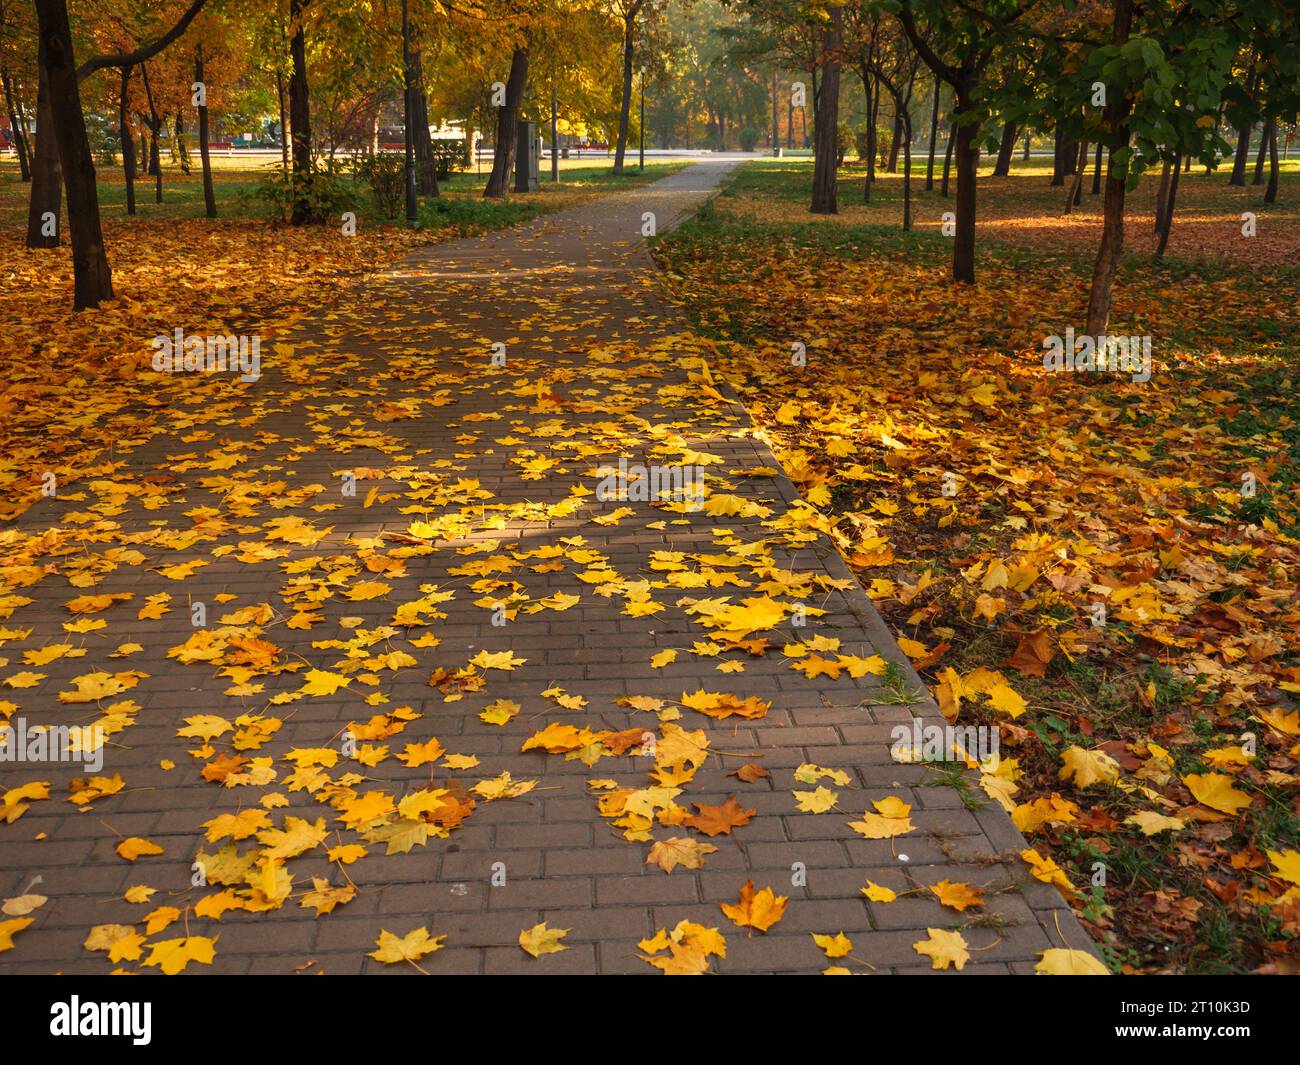 Closeup of golden yellow and orange autumn fallen leaves on a titled pathway in a city park. Beautiful natural fall background. Stock Photo